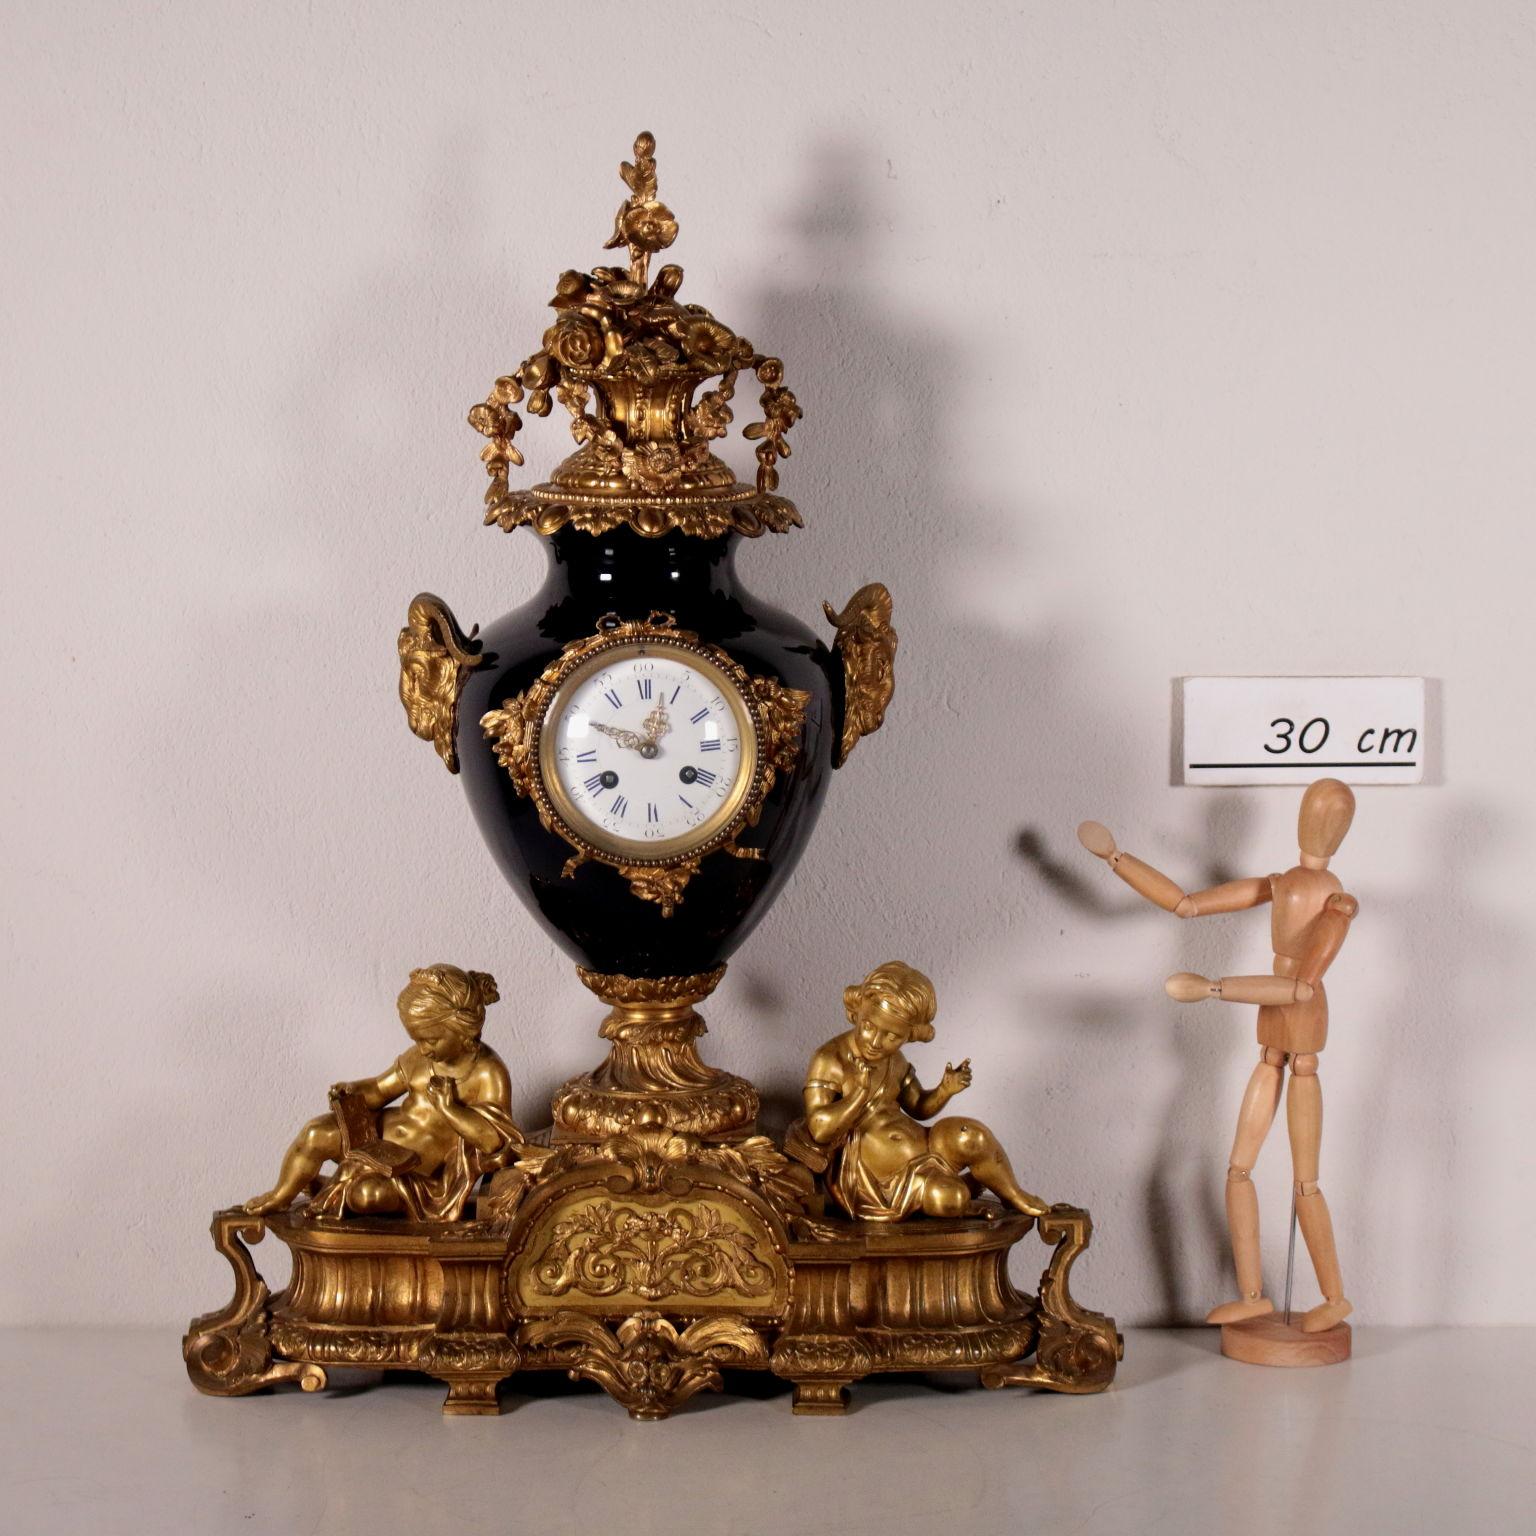 Chiseled gilded bronze clock. On the base there are decorations with plants motifs and leaves-like spirals; on the central reserve there are pierced bronze applications of branches, leaves and a basket of fruit. On the sides there are all-round